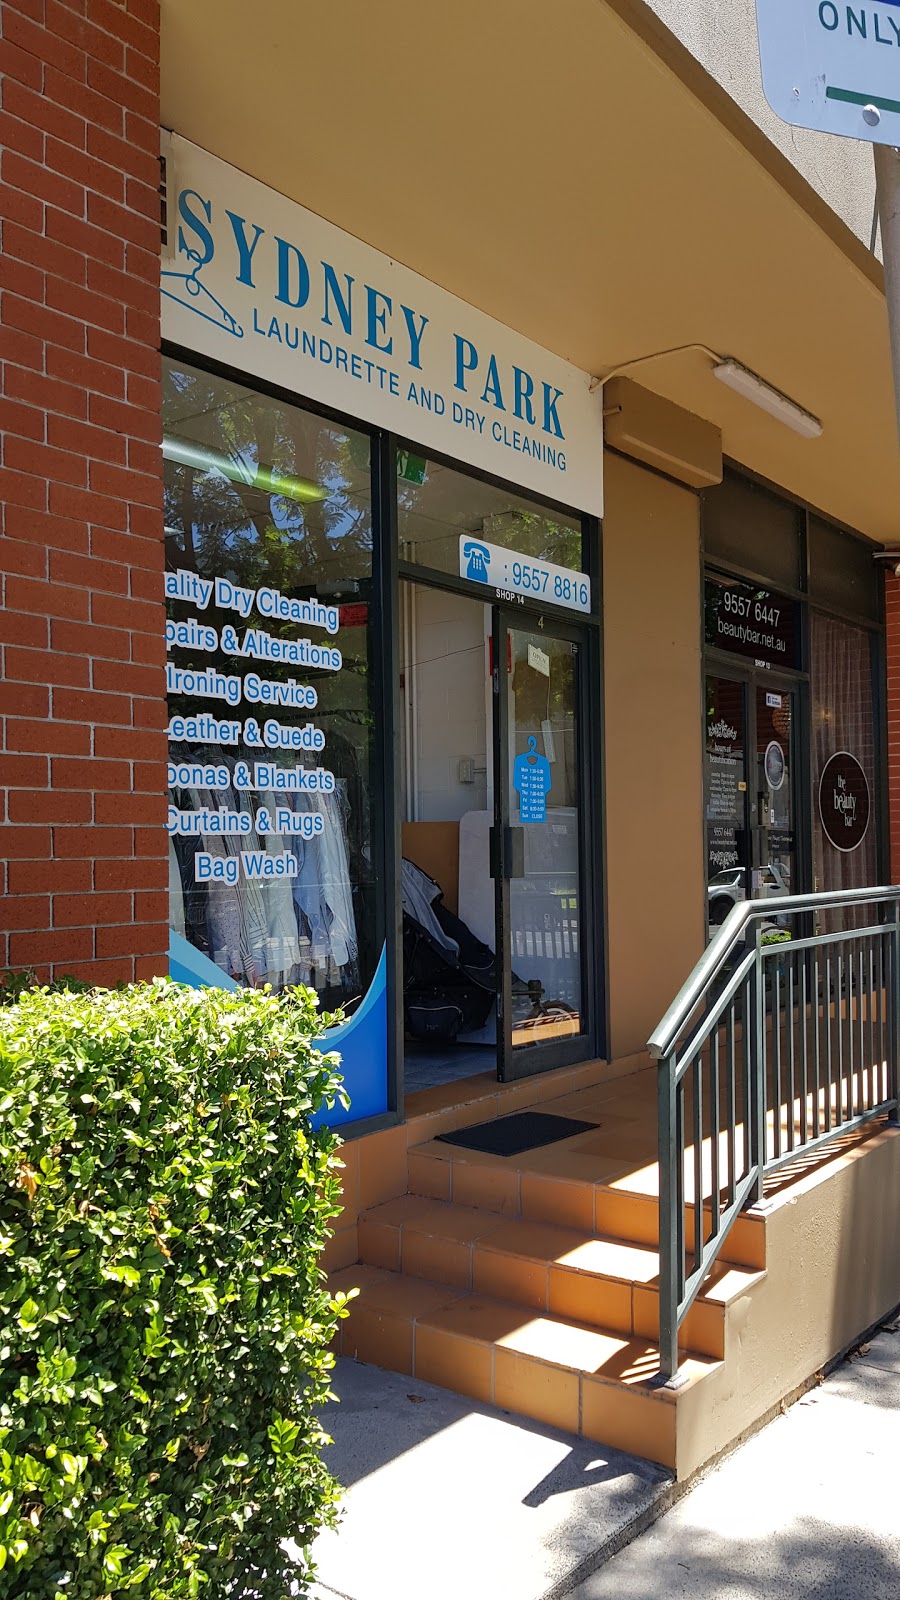 Sydney Park Laundry and Drycleaners | 177 Mitchell Rd, Erskineville NSW 2043, Australia | Phone: (02) 9557 8816